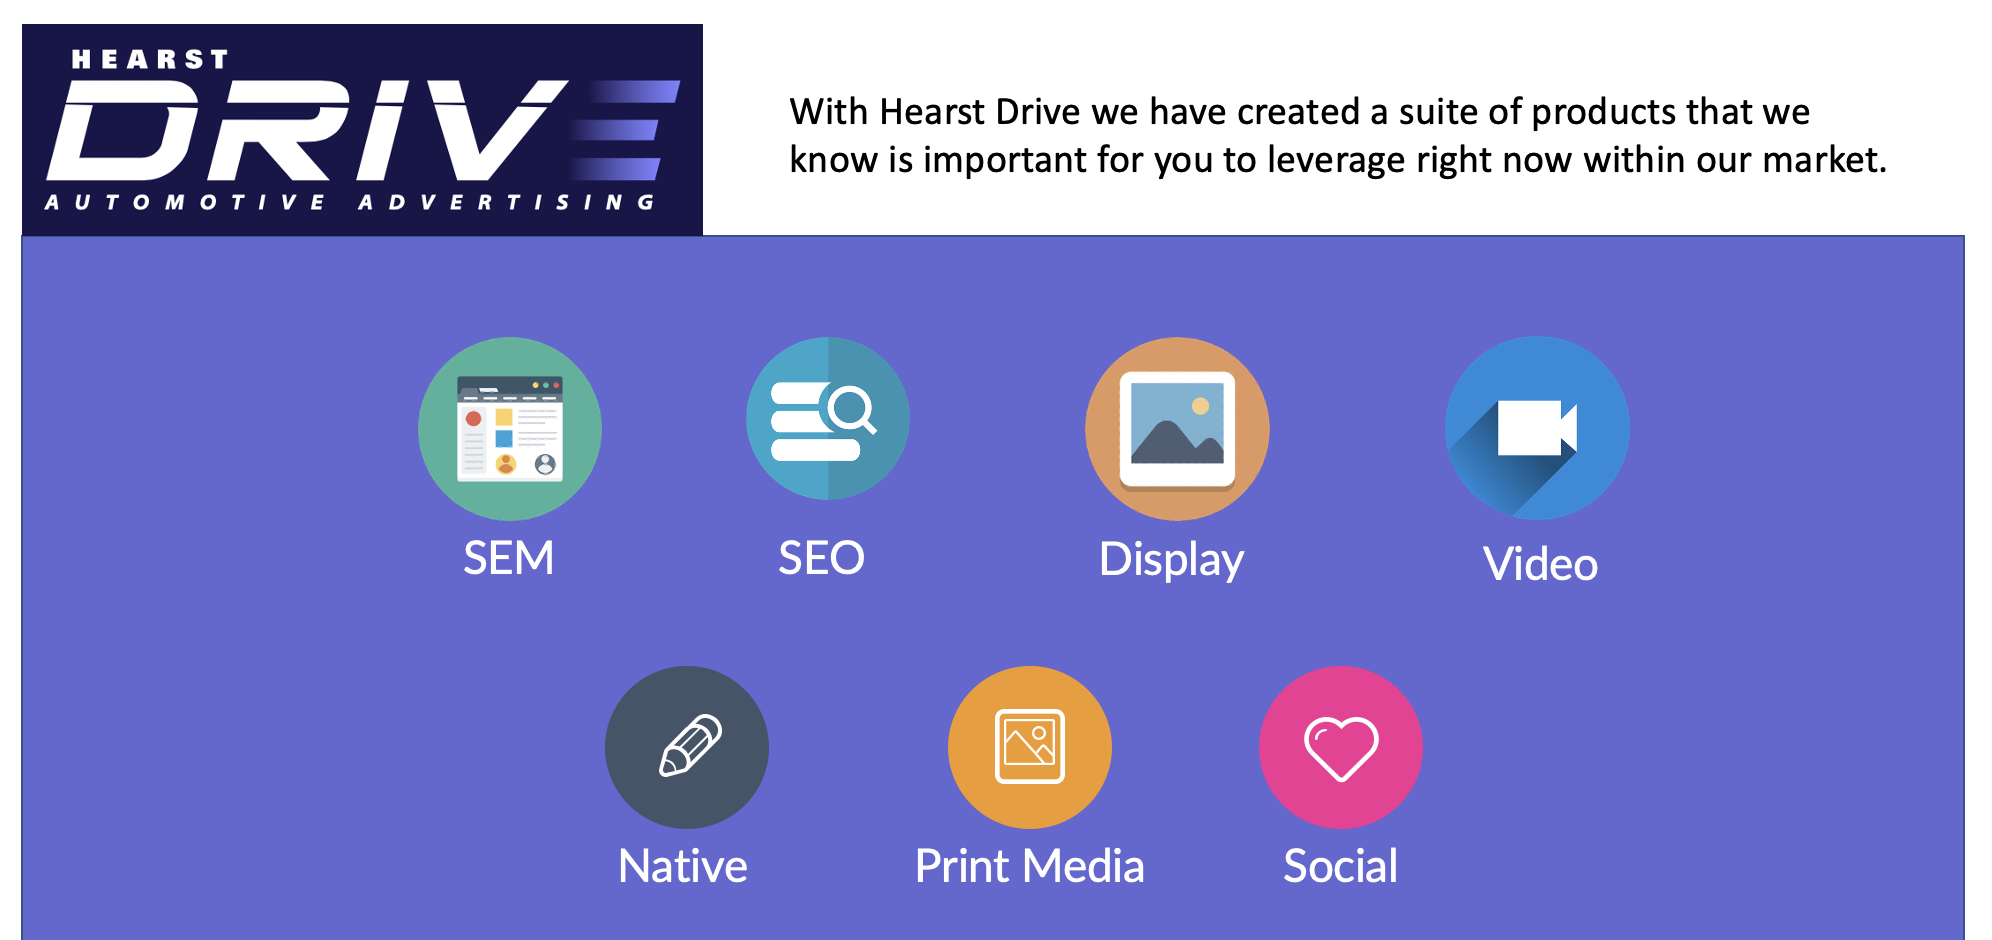 Hearst Drive products: SEM, SEO, Display, Video, Native Content, Print Media, Social